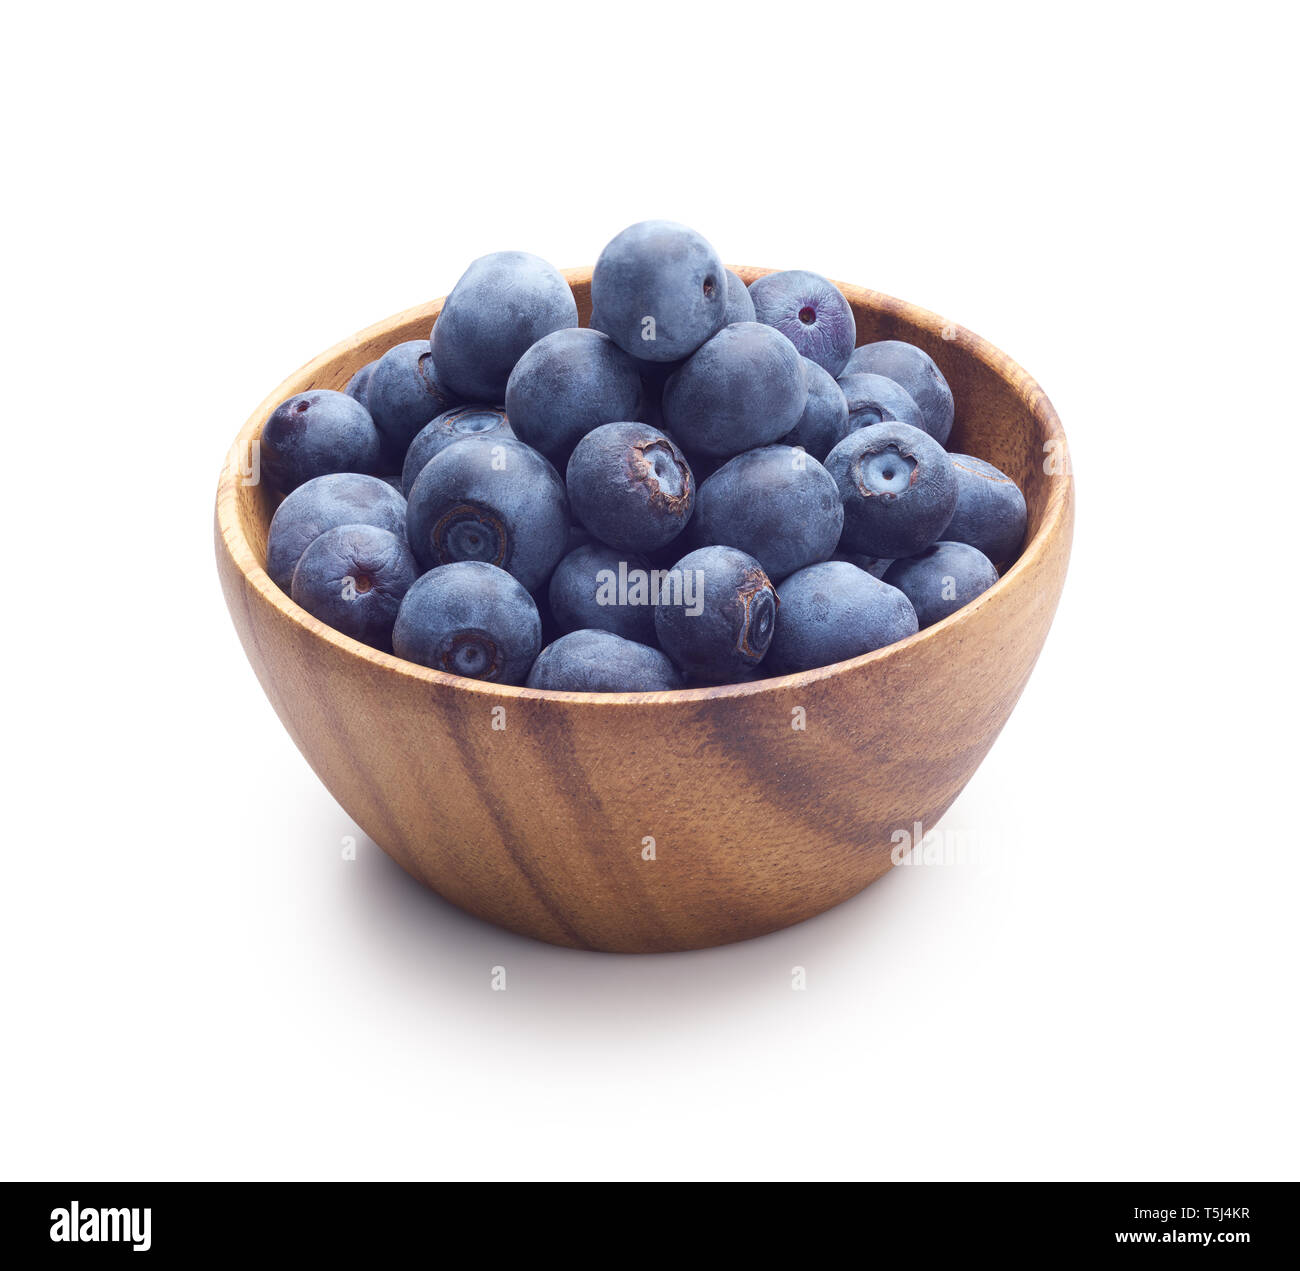 Wooden bowl filled with blueberry isolated on white background Stock Photo